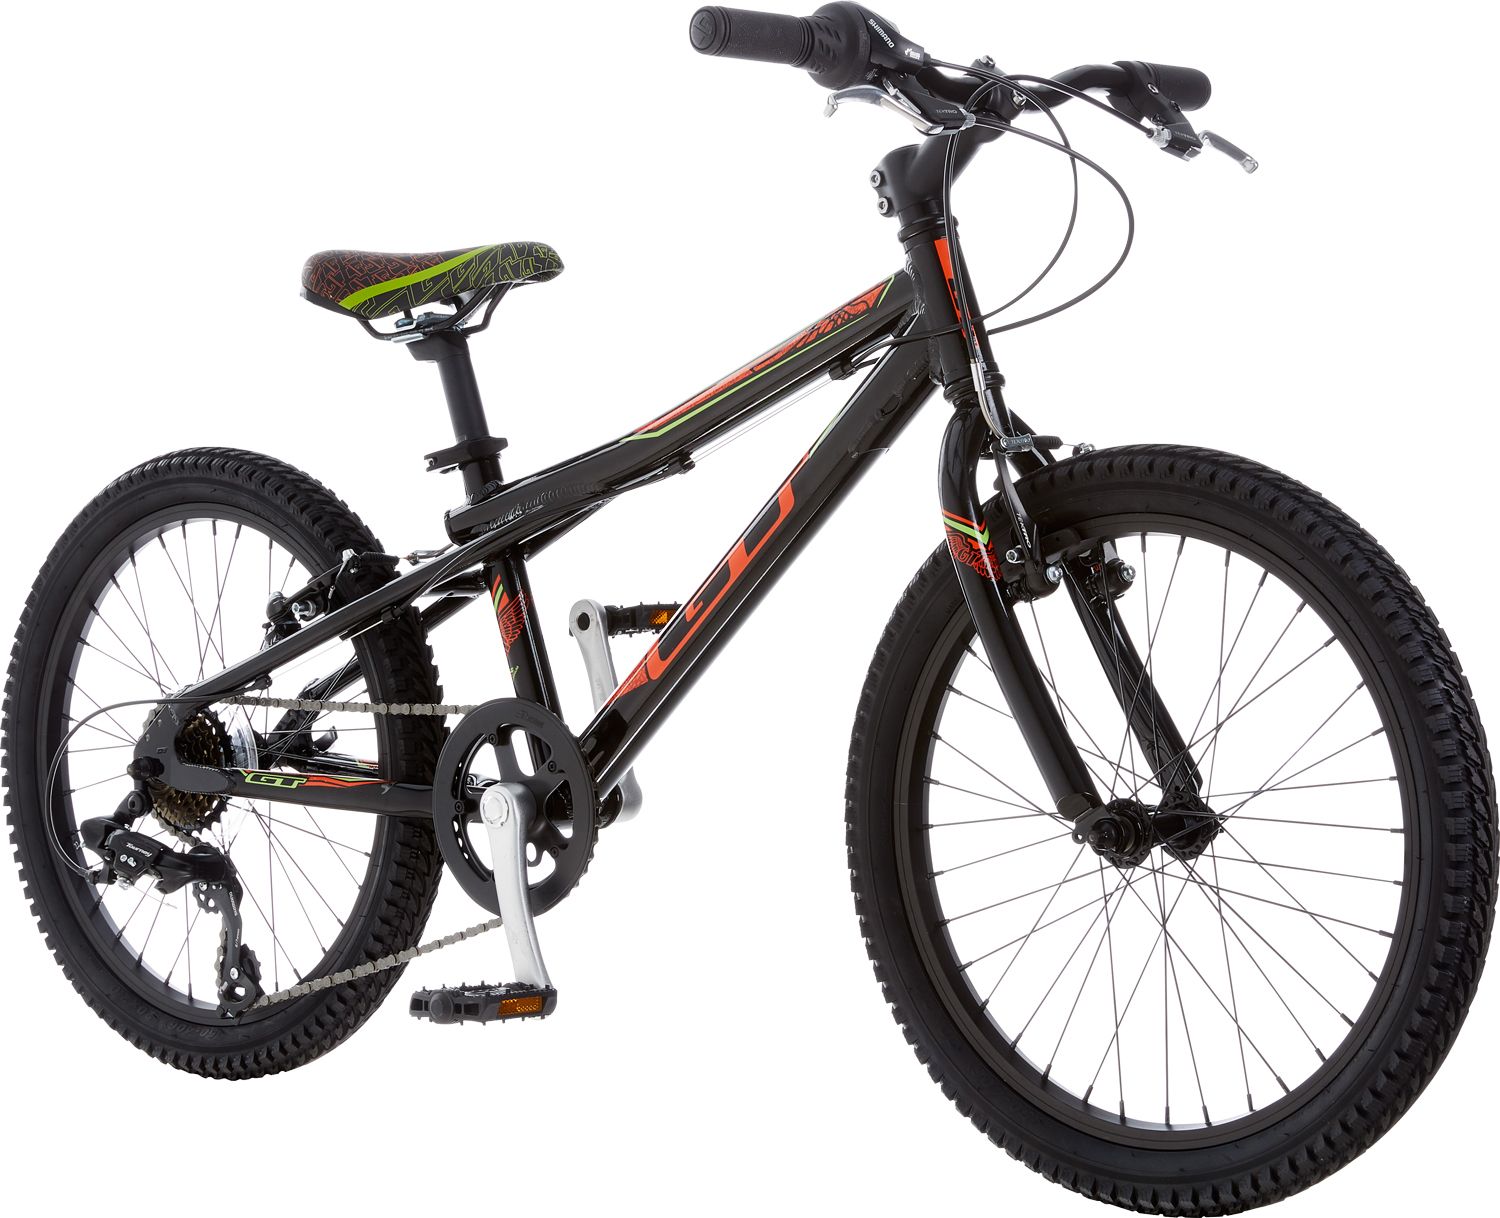 20 inch boy's mountain bicycle